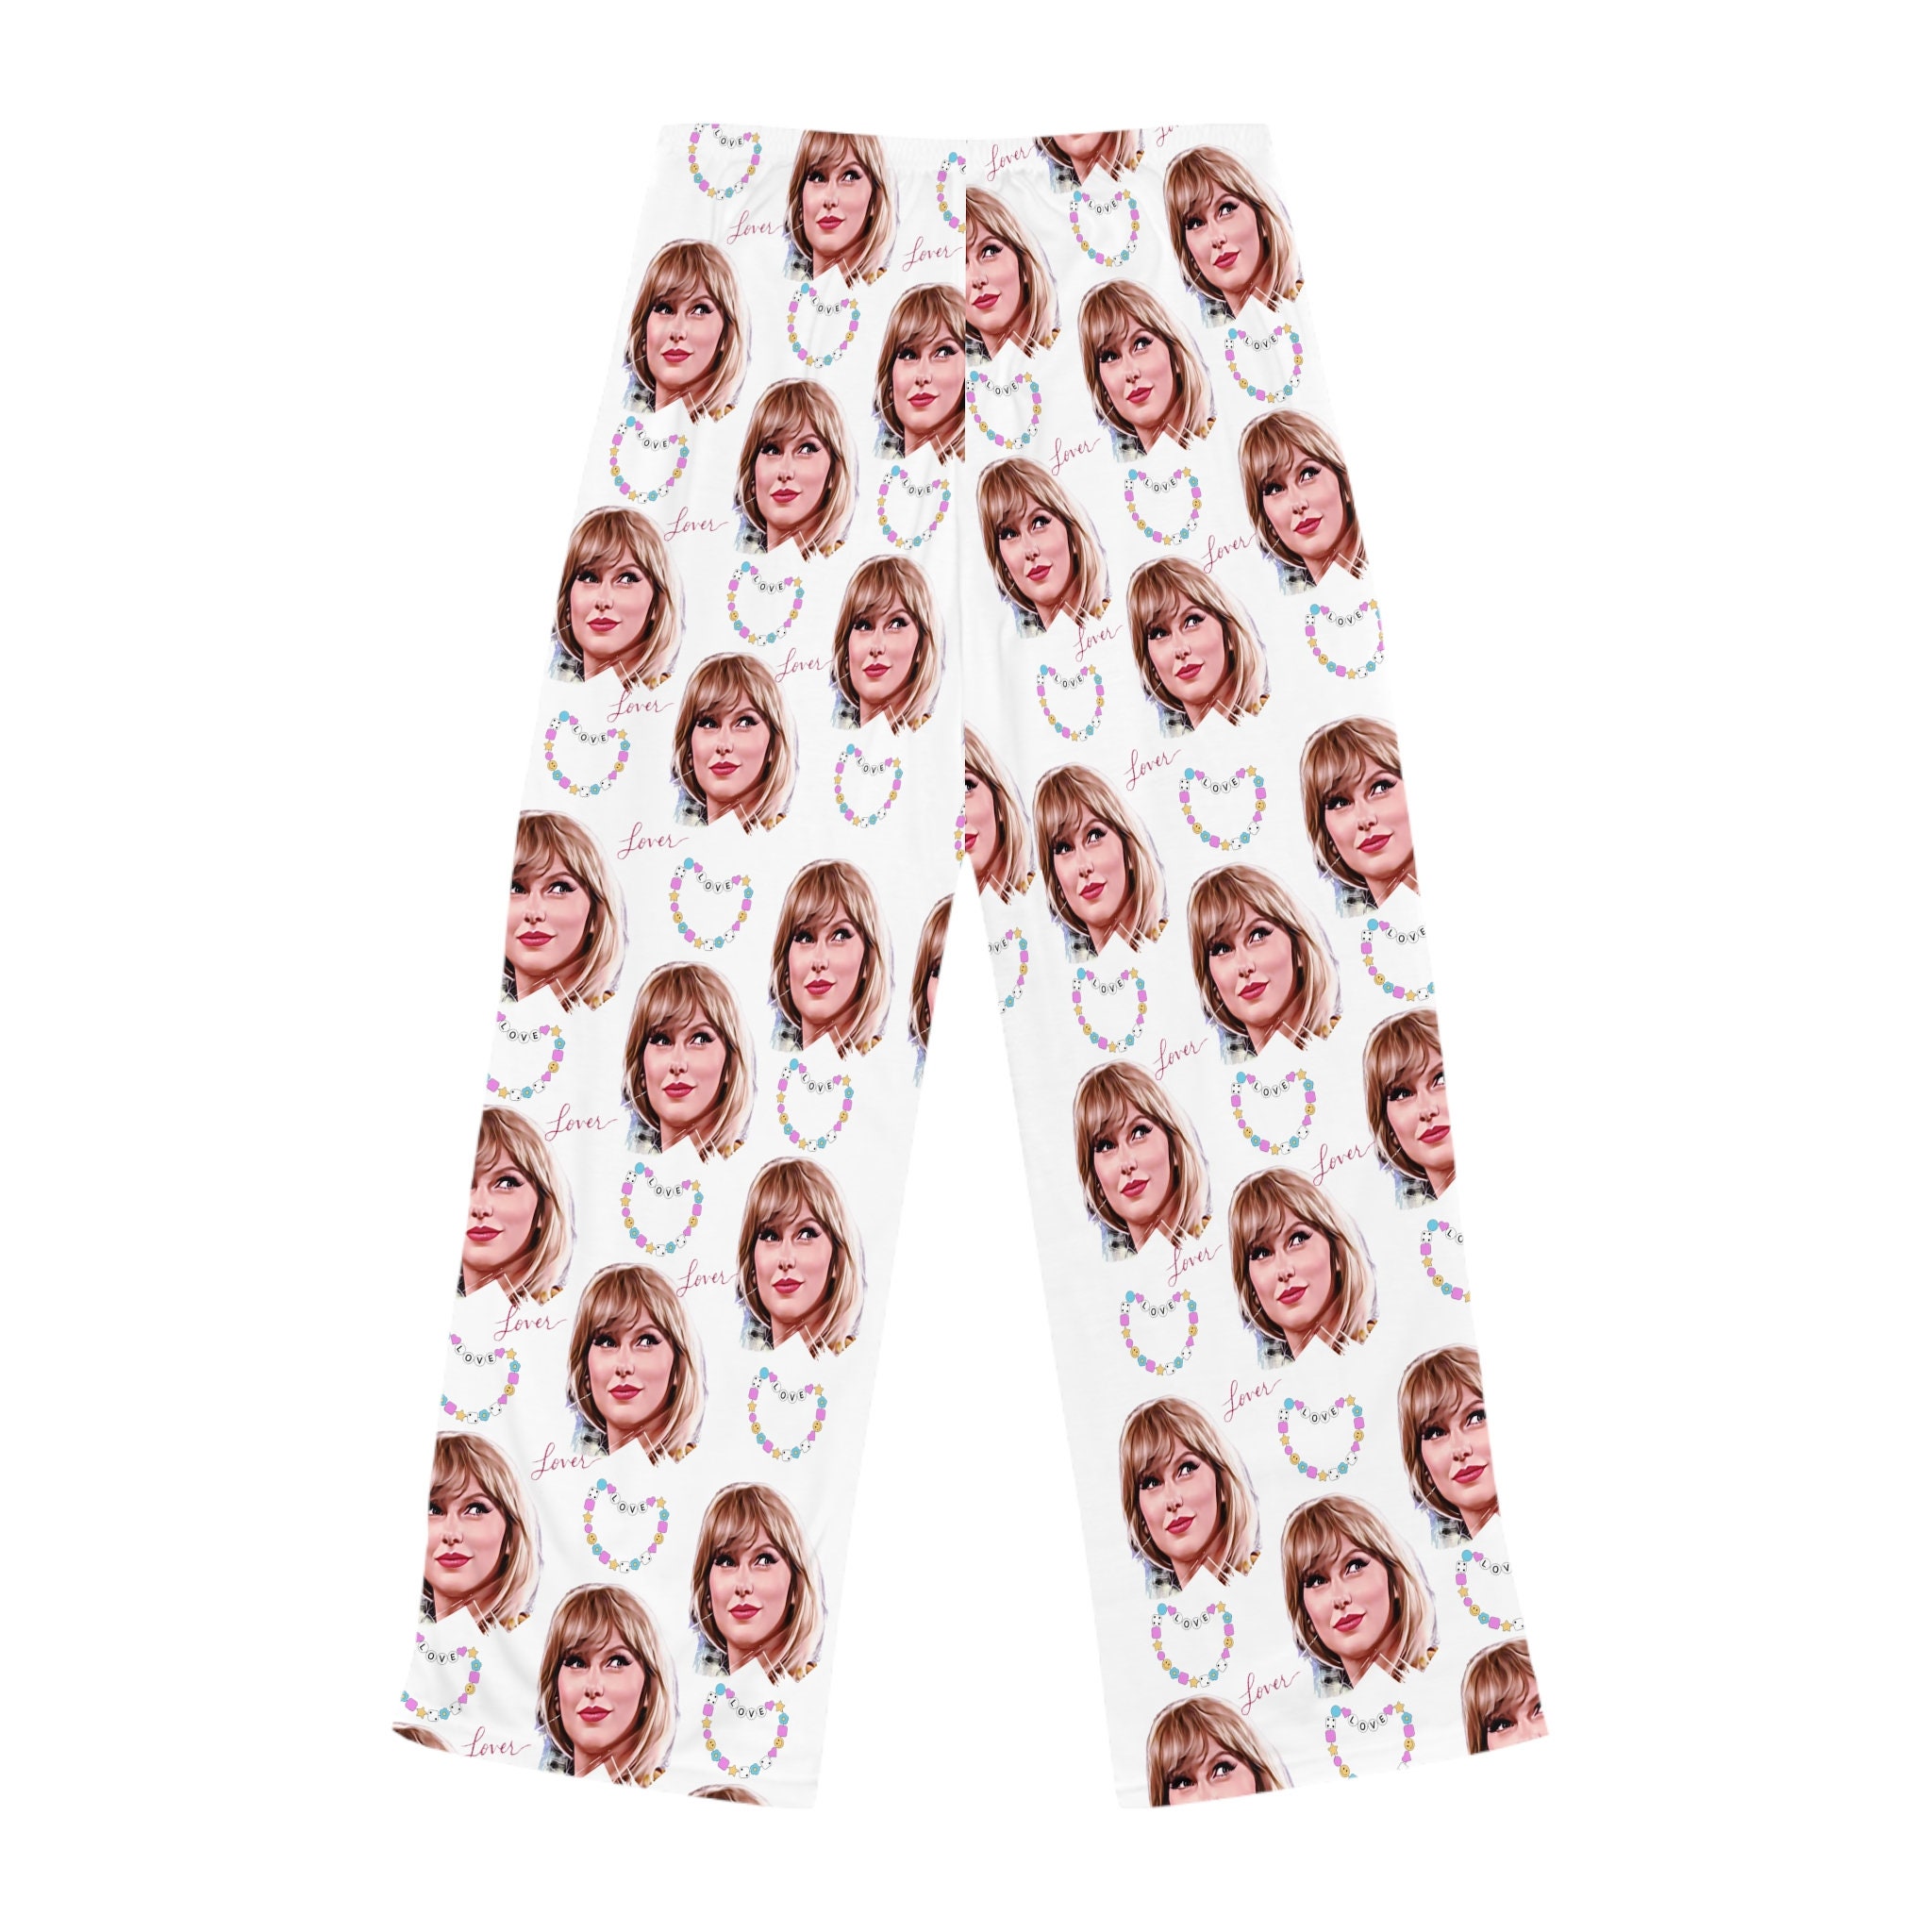 taylor version Pajama Pants, Taylor Merch, Gift For Mother's day